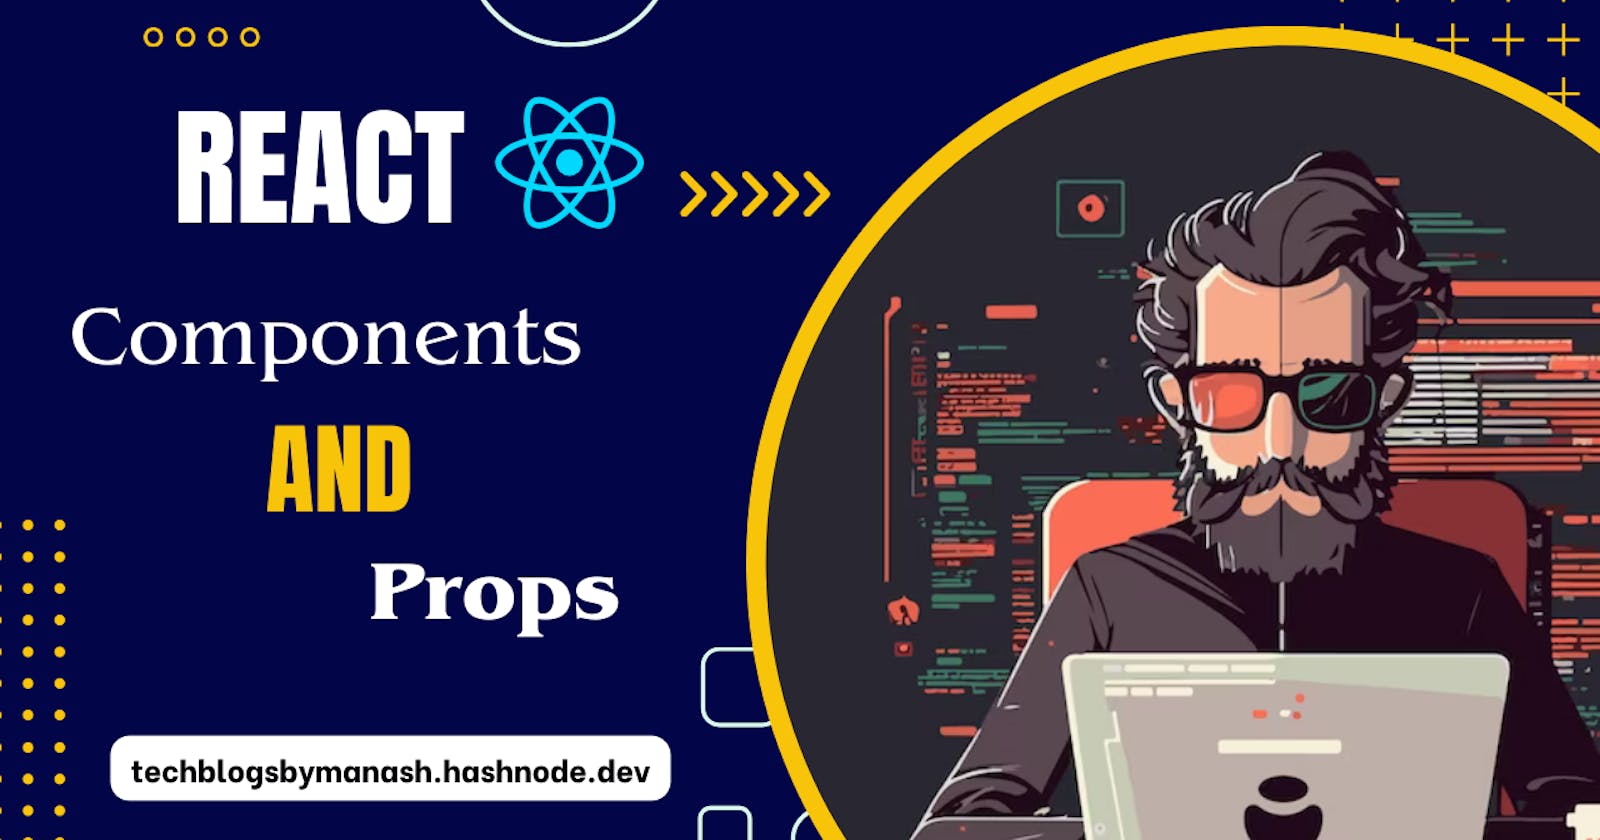 The Ultimate Guide to React Components and Props